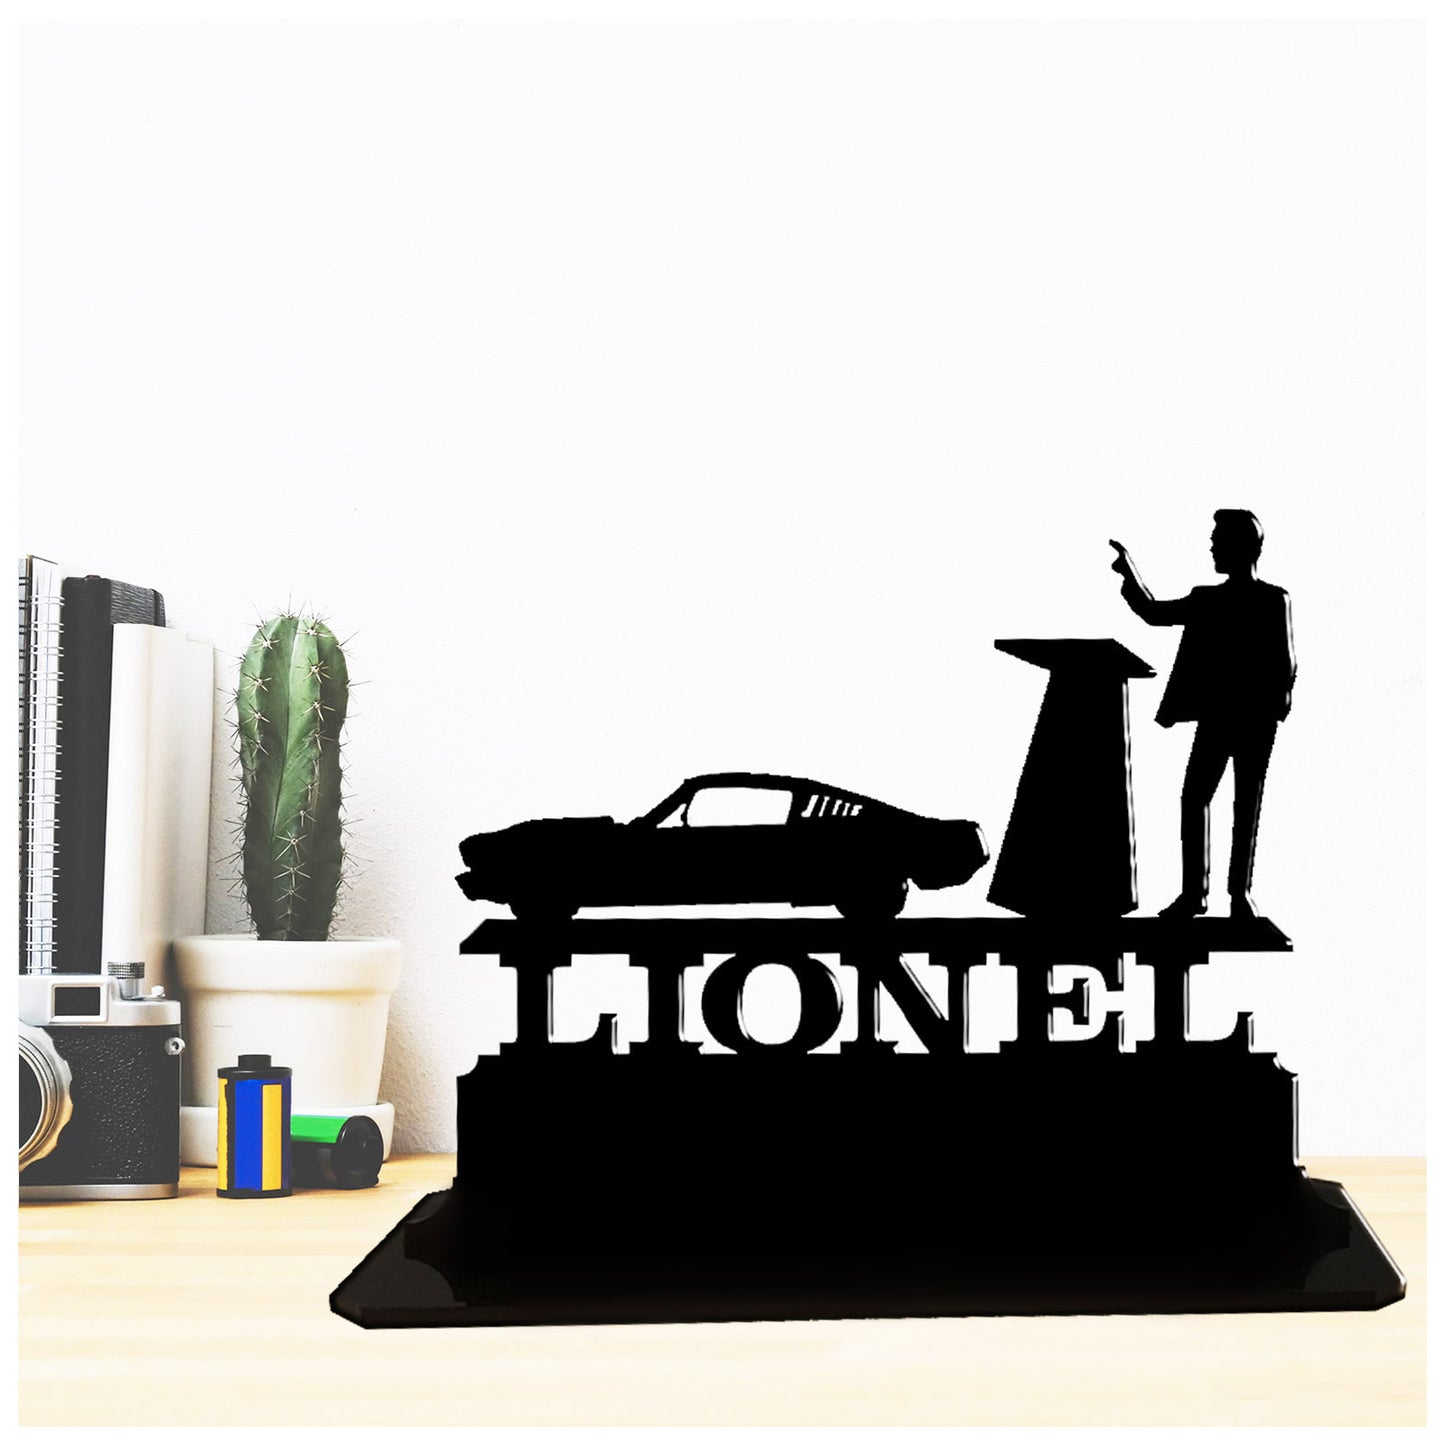 Acrylic unique personalised classic car auctioneer gift ideas. Standalone keepsake ornament.